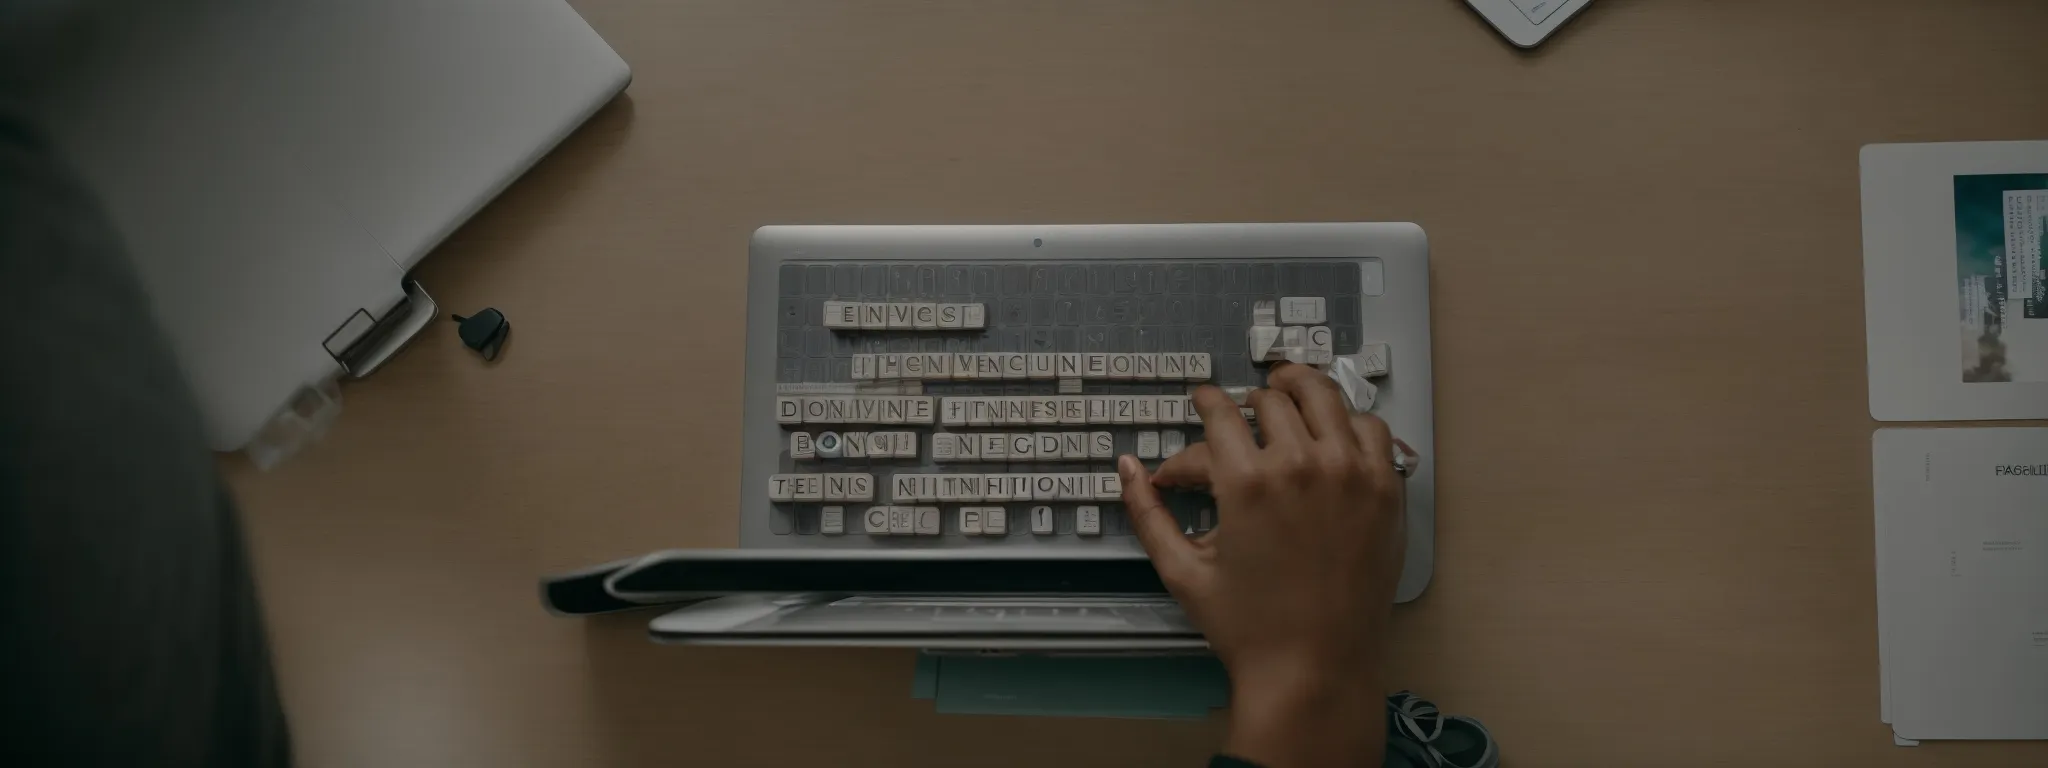 a person sits at a minimalist desk, thoughtfully placing scrabble tiles with keywords into an open laptop screen displaying an article draft.